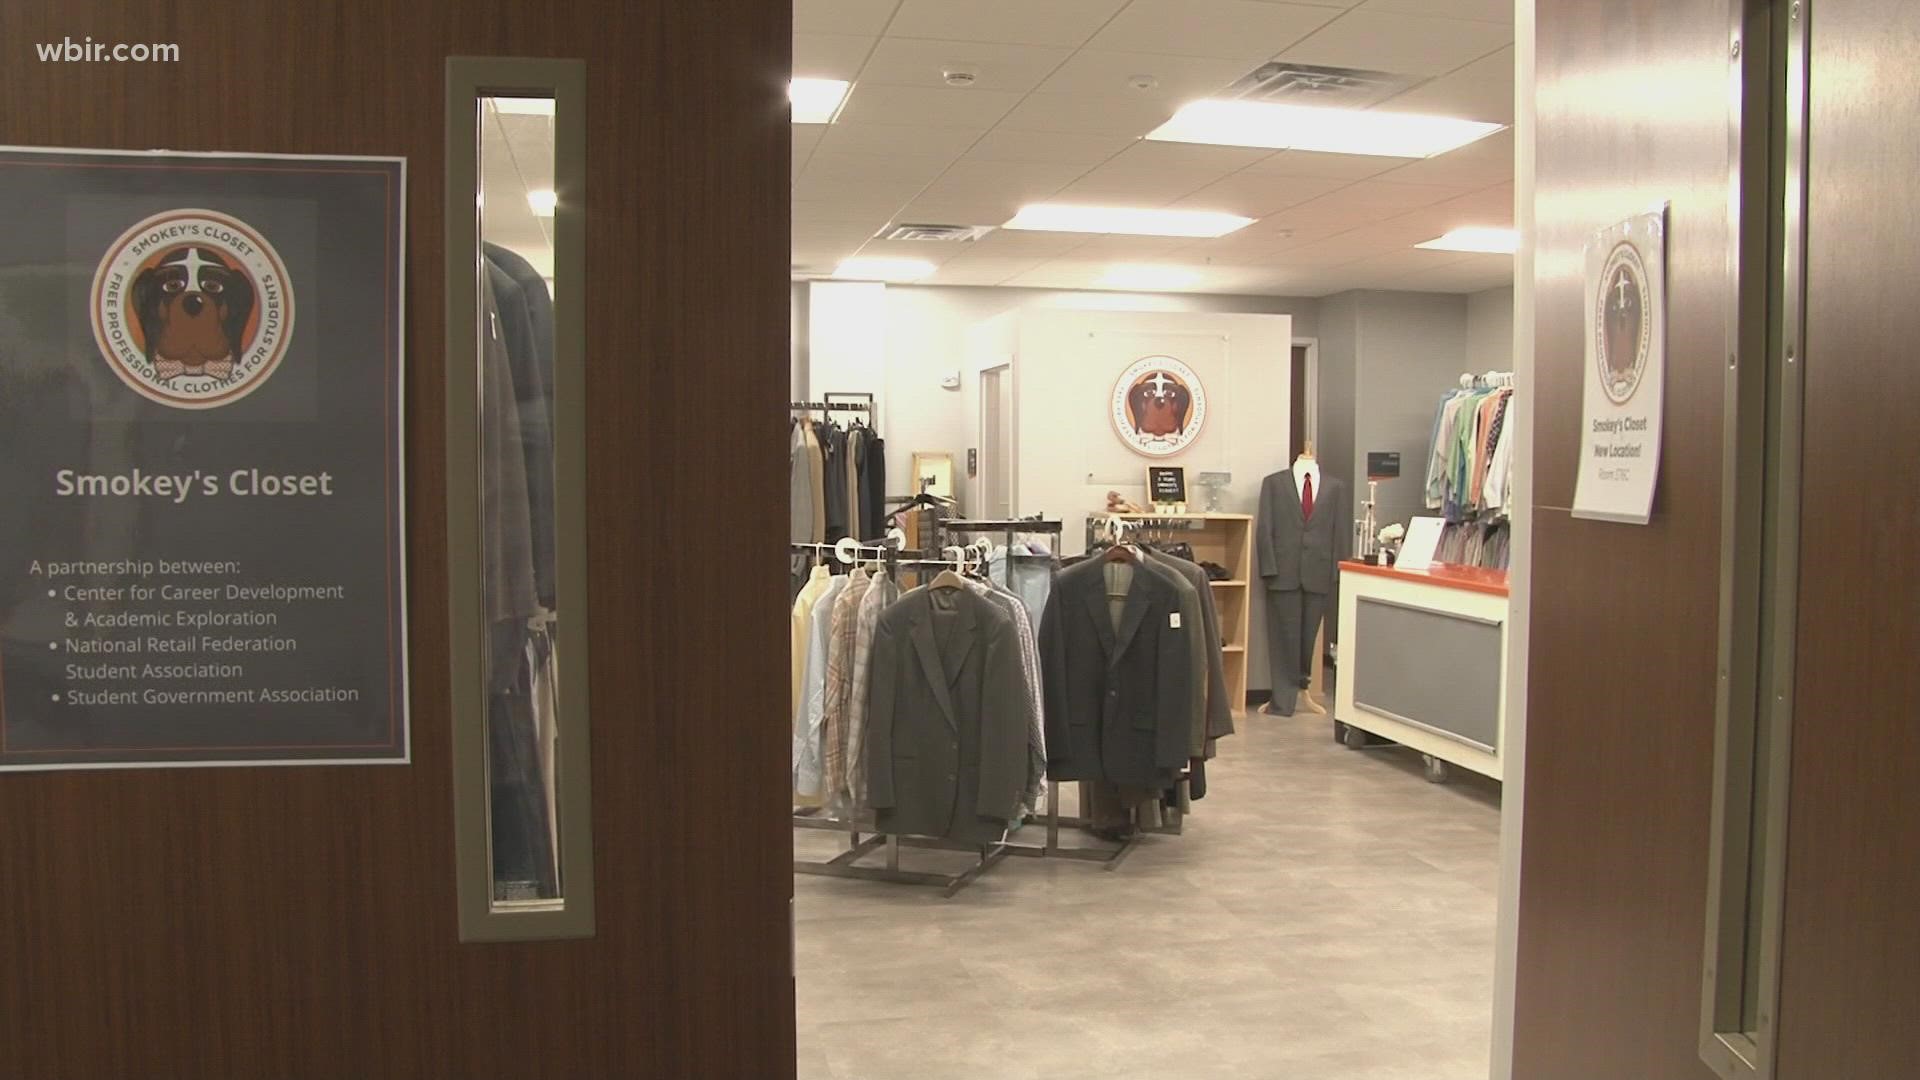 Smokey's Closet opened in the fall of 2016, and officials said they have provided professional clothing for more than 2,200 students.